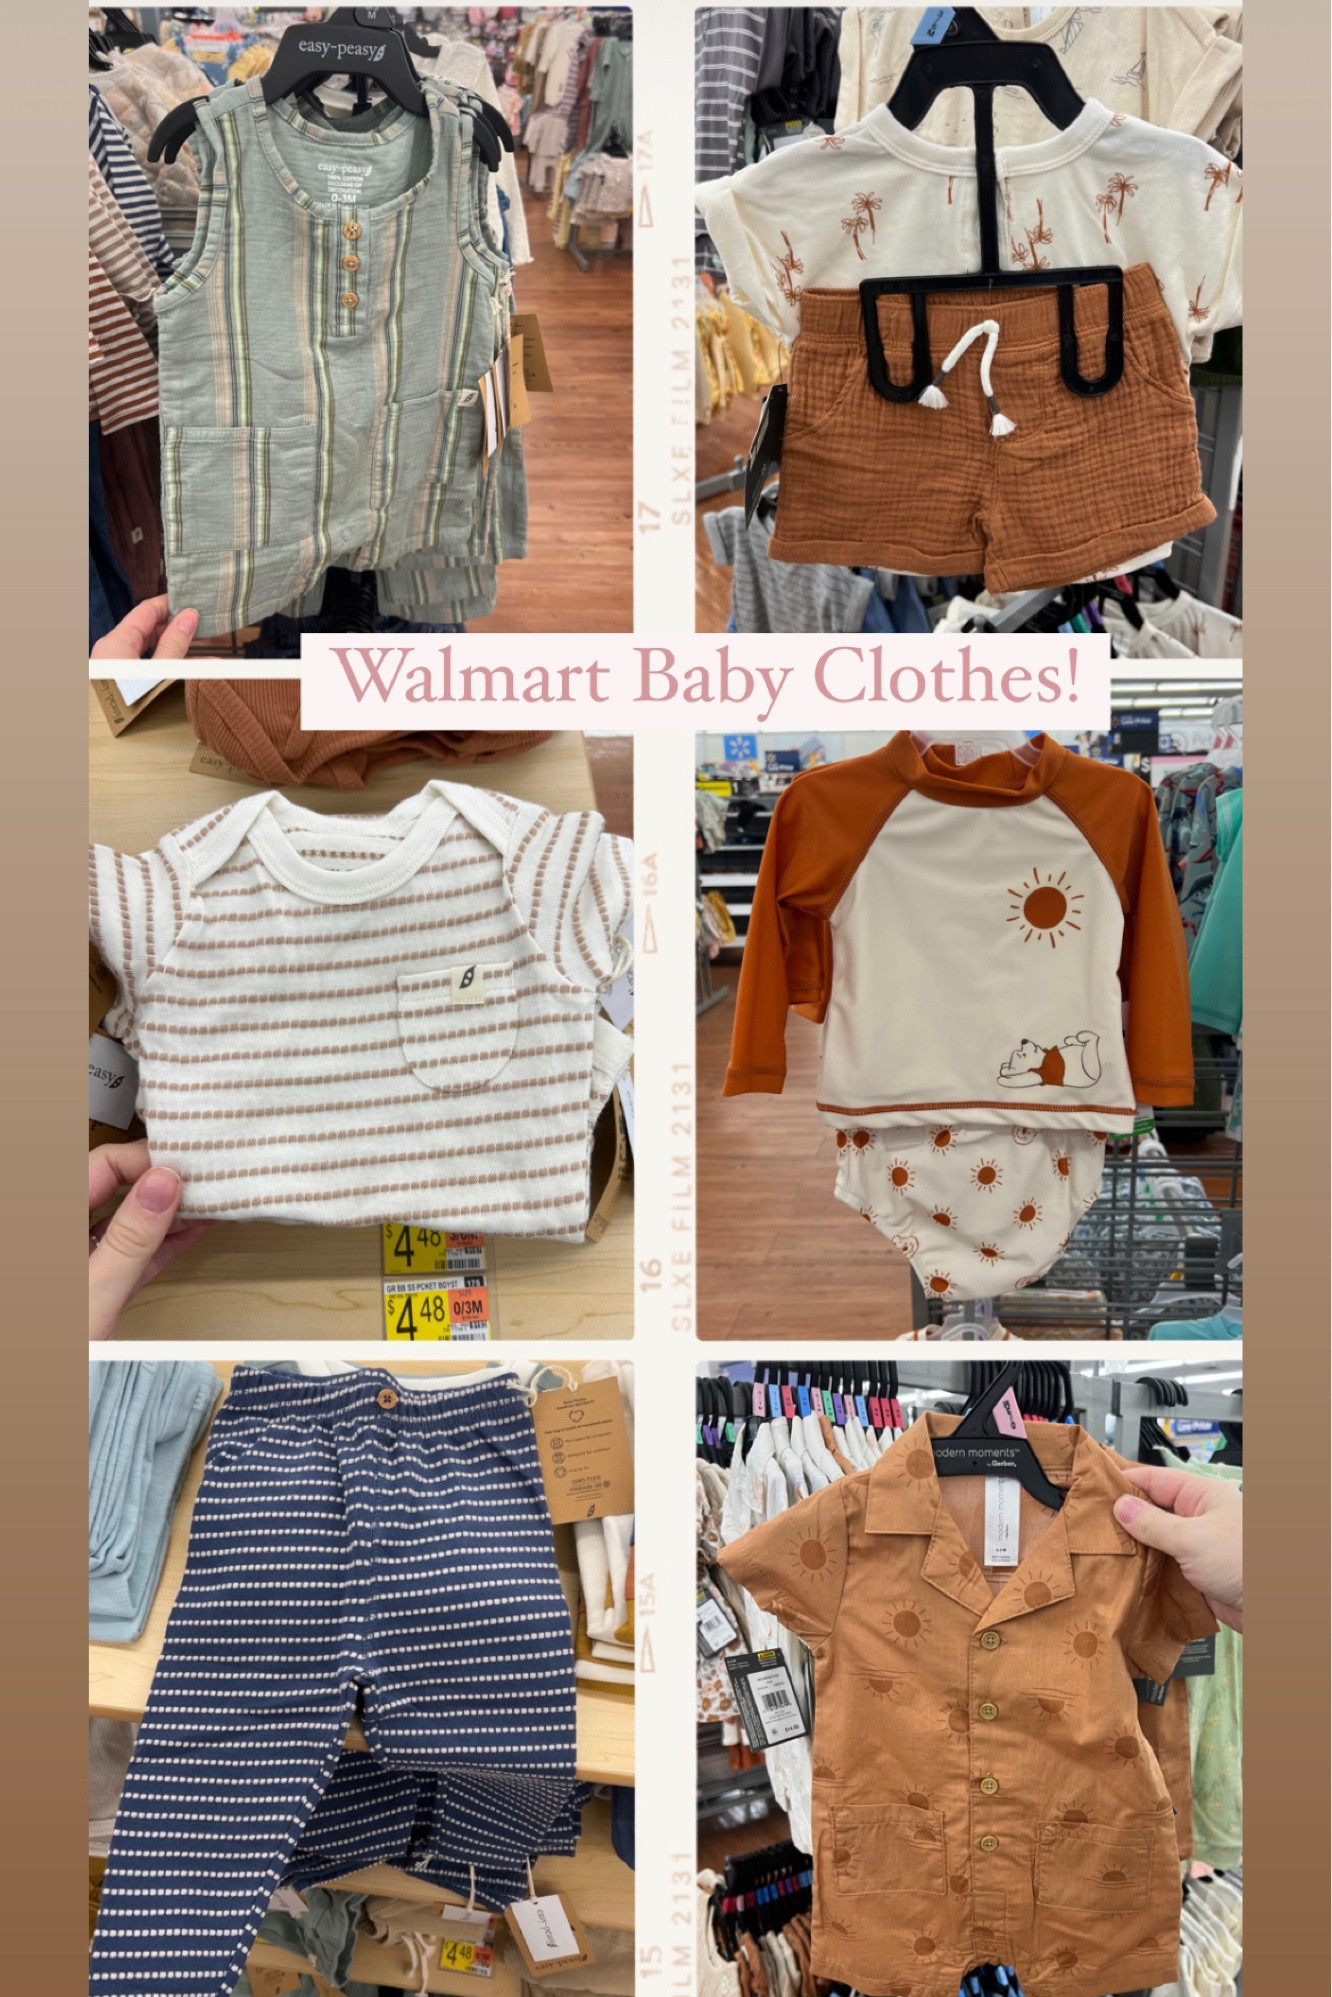 easy peasy Baby and Toddler Boy Sweatshirt and Jogger Pants Outfit